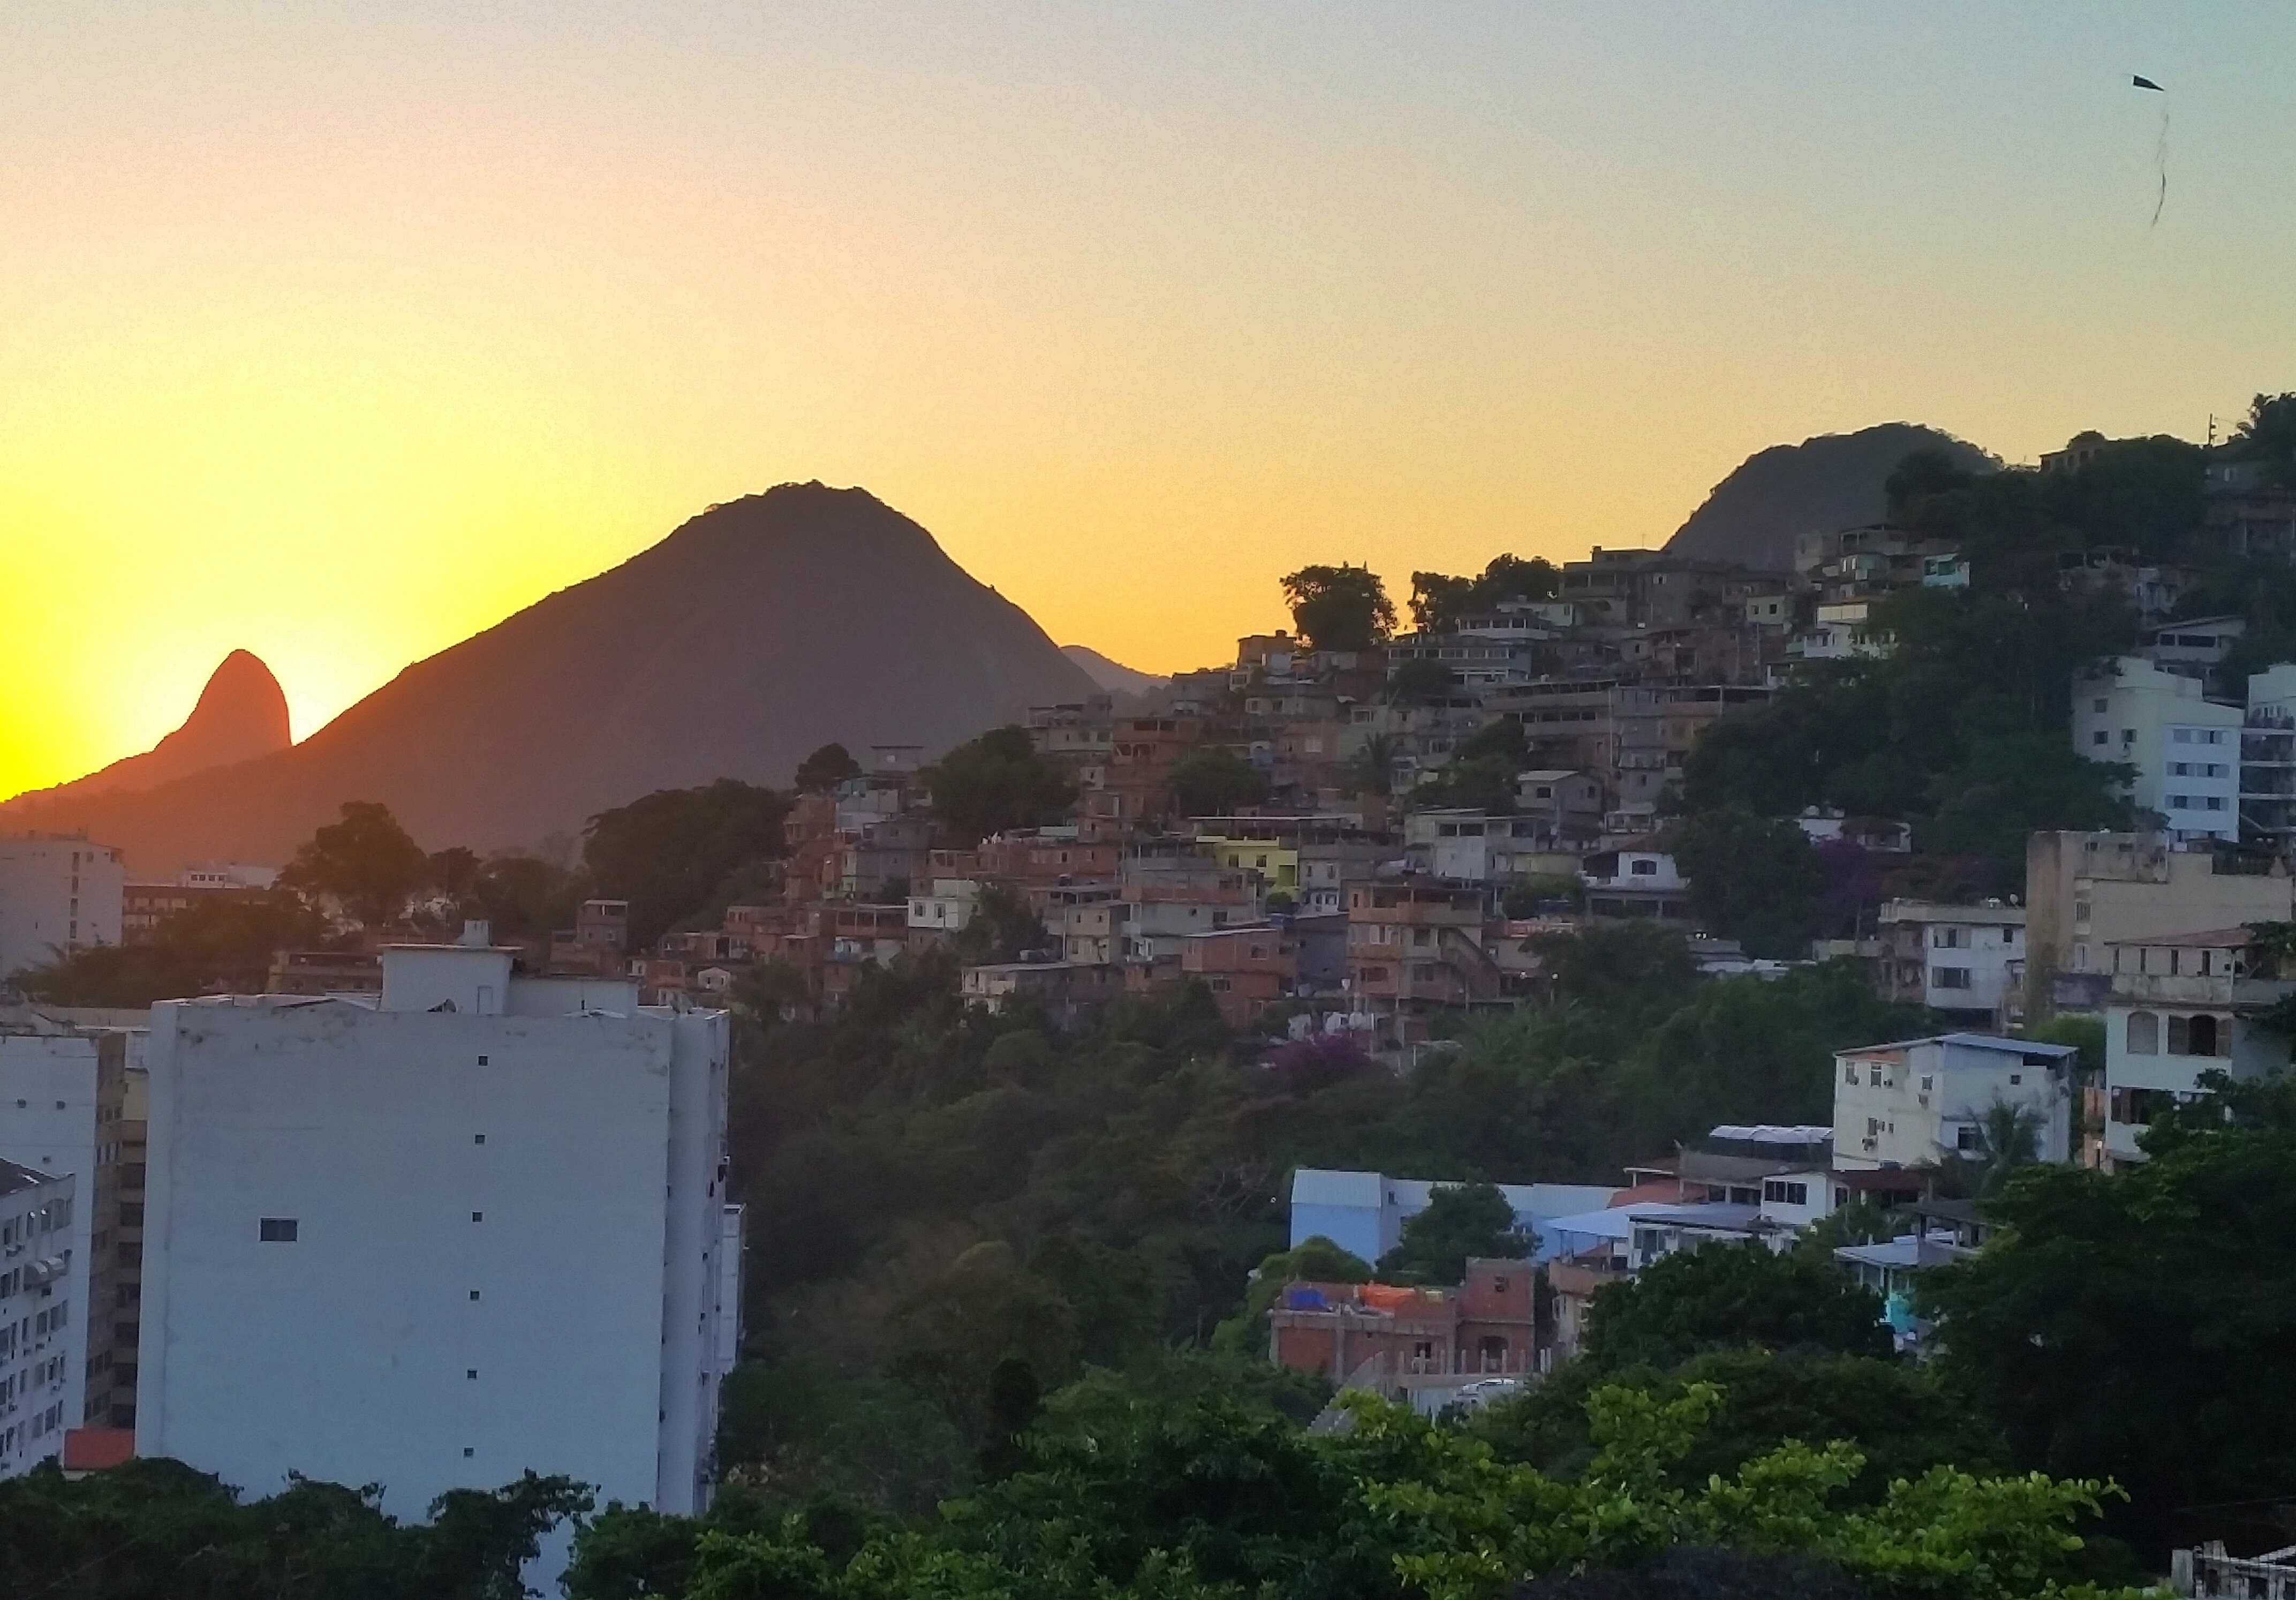 Is it safe for tourists to visit the favelas in Rio de Janeiro? - A glowing sunset over a favela in Rio de Janeiro